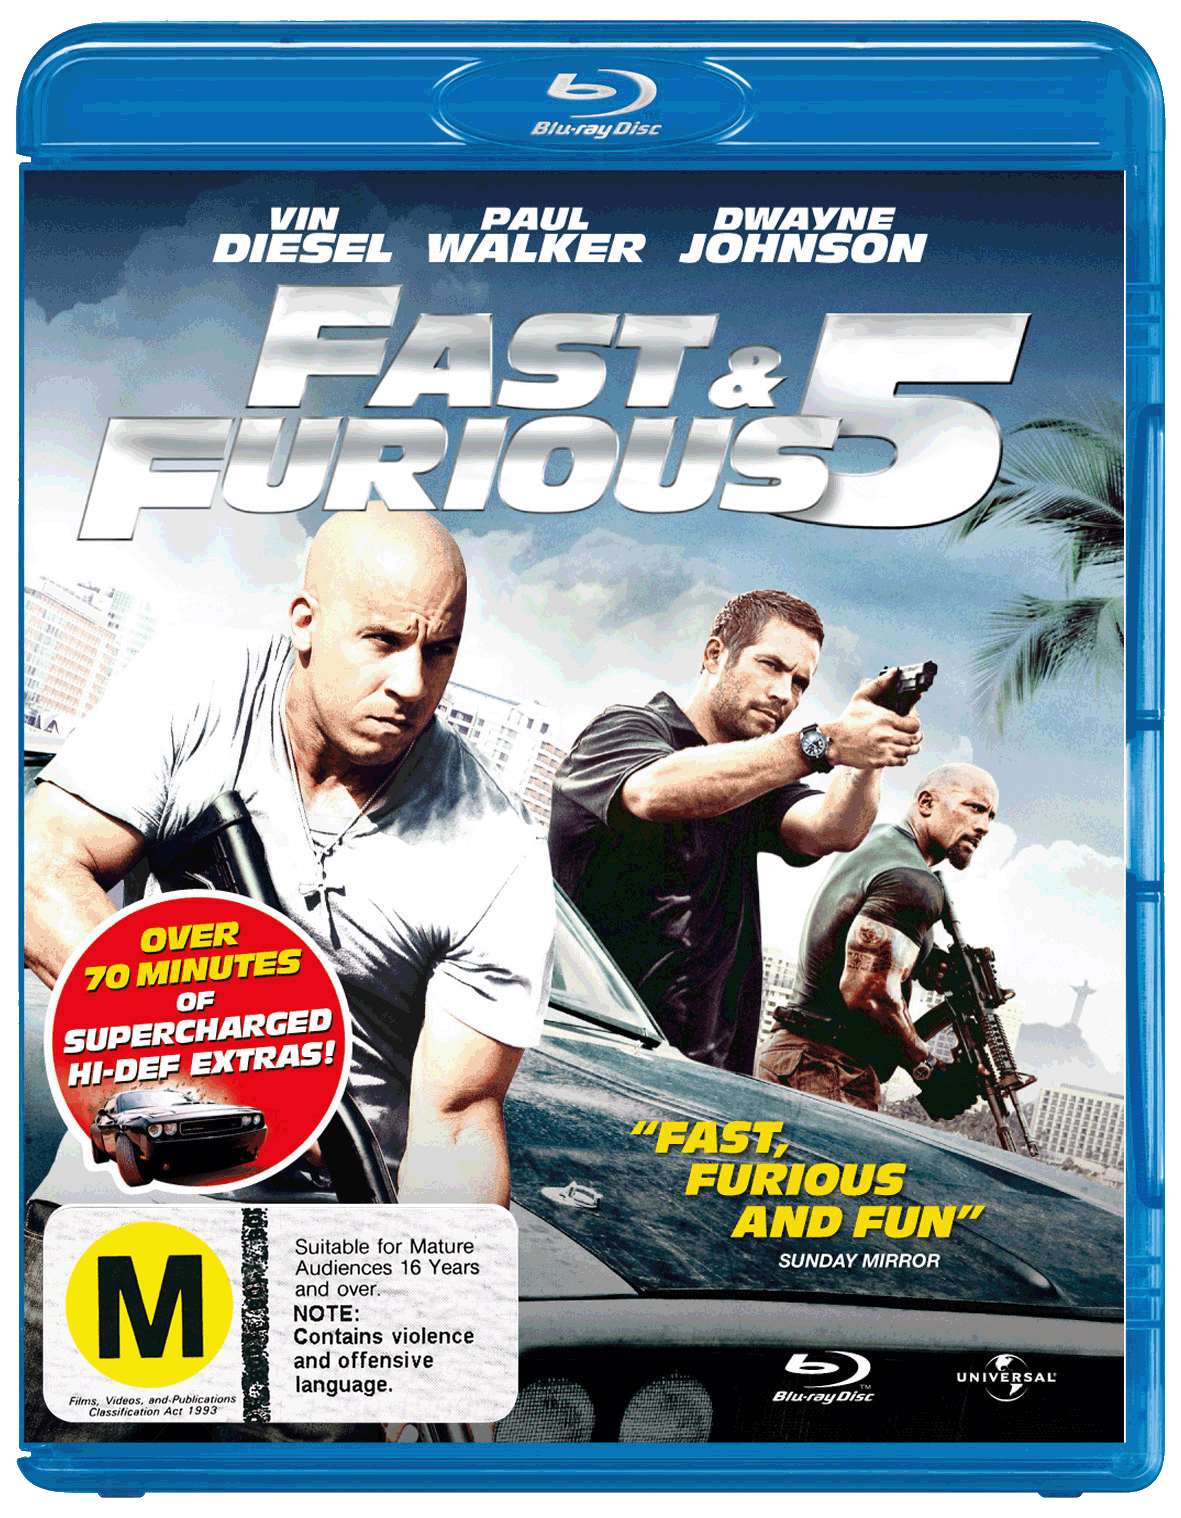 Fast and Furious 5 DVD Review